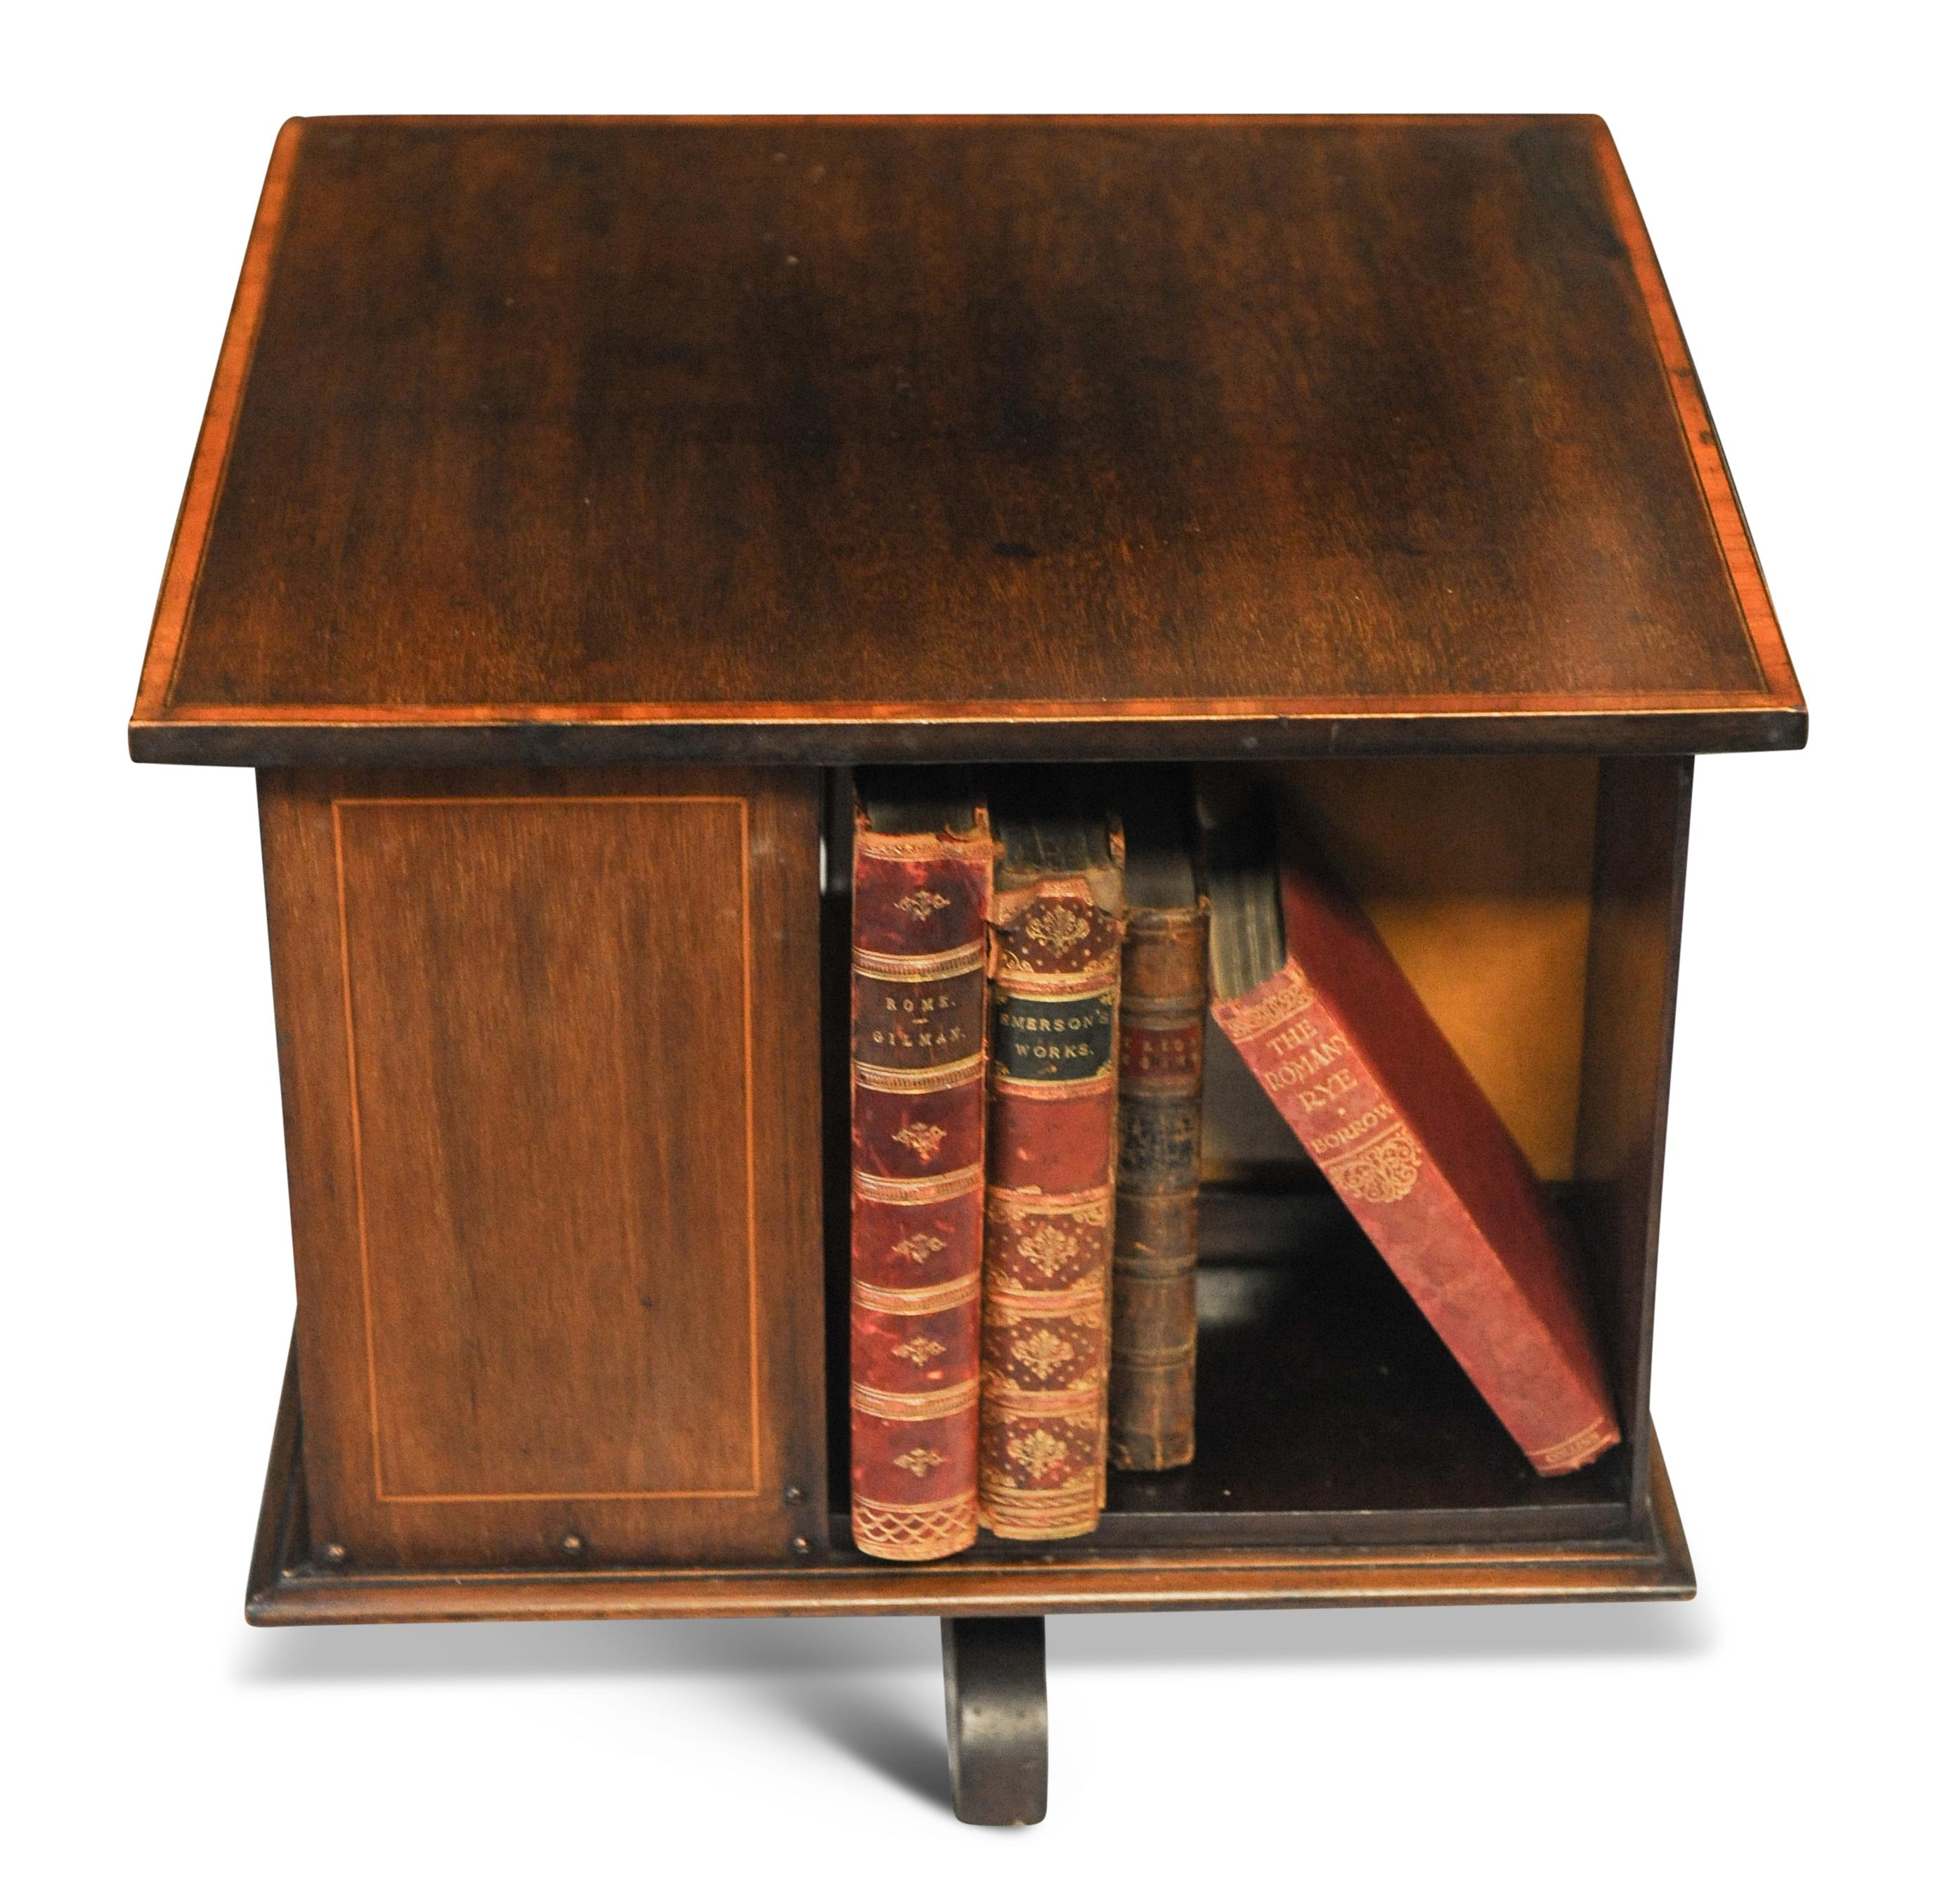 British Early 20th Century Revolving Tabletop Bookcase Handmade With In-Lay Detailing For Sale